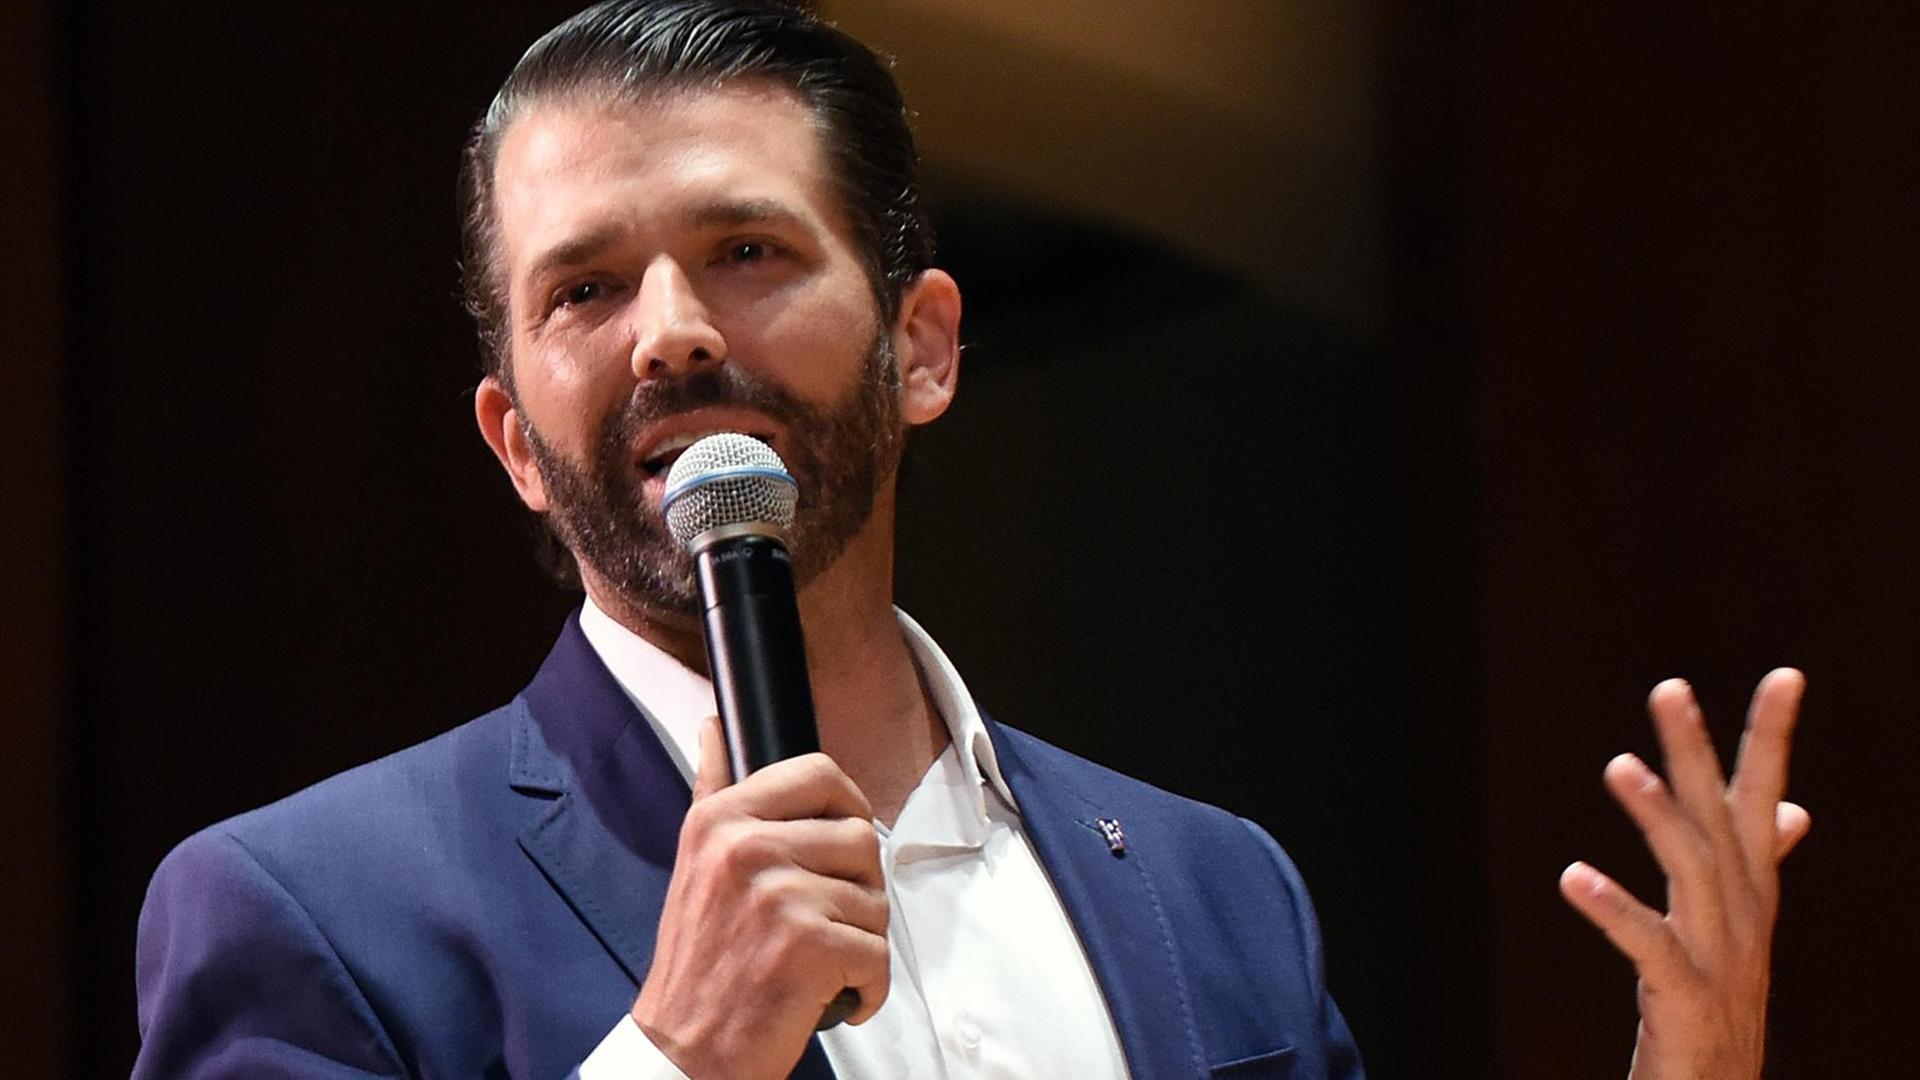 October 10, 2019, Gainesville, Florida, United States: Donald Trump, Jr. speaks at the University of Florida..The couple was paid $50,000 from student activity fees and tickets were distributed free of charge to students. The event drew hundreds of protesters outside the University Auditorium who objected to what they called a campaign rally. Trump, Jr and Guilfoyle spoke for less than a half hour each and answered a few questions submitted on Twitter. Several protesters were removed from the auditorium during the event. Gainesville United States PUBLICATIONxINxGERxSUIxAUTxONLY - ZUMAs197 20191010zaas197153 Copyright: xPaulxHennessyx